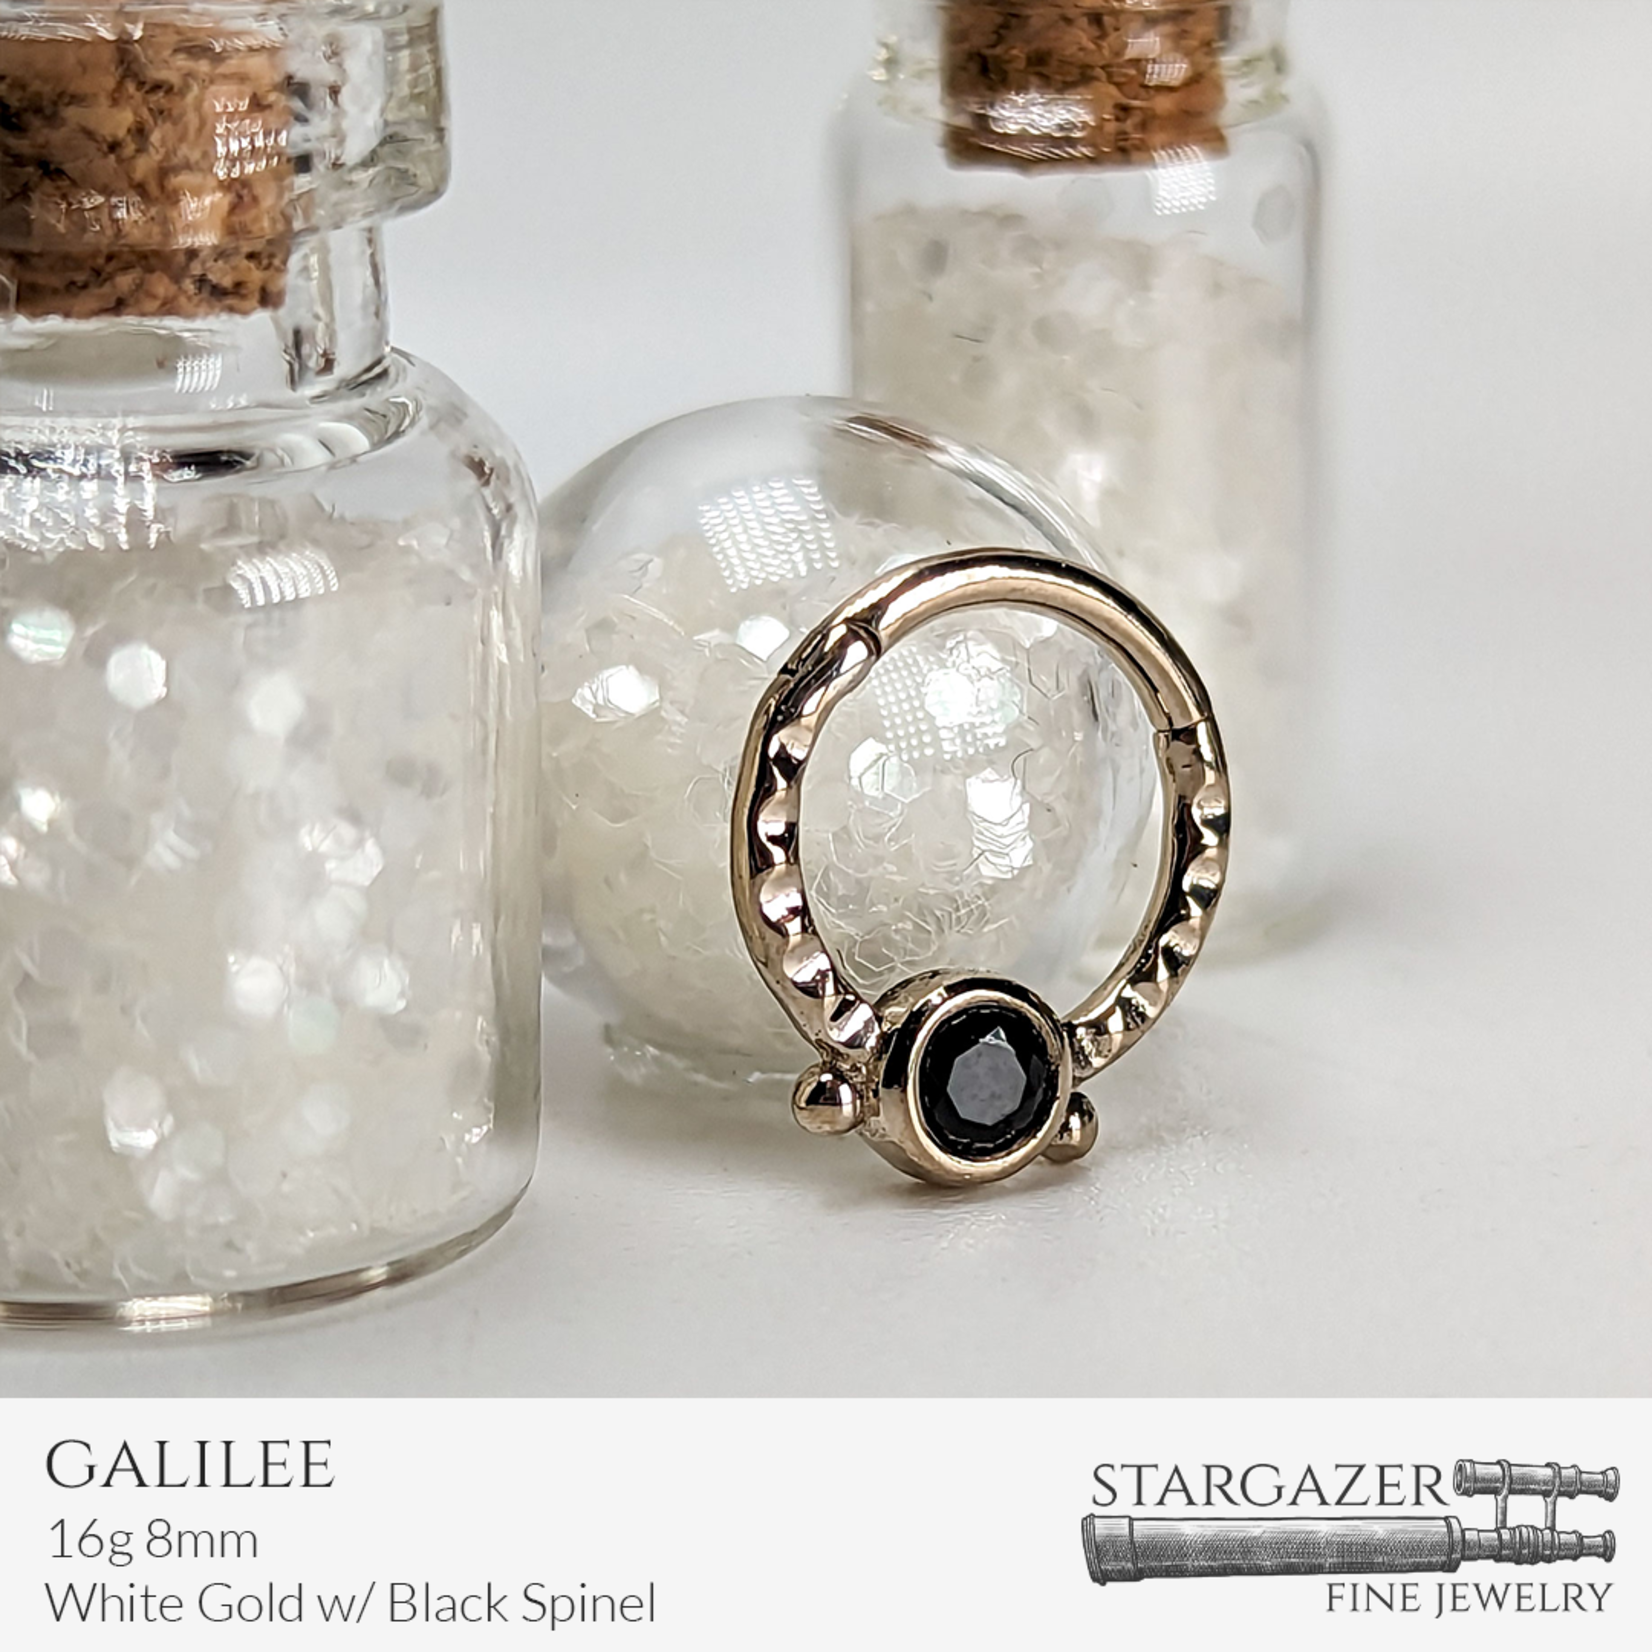 Galilee 16g 8mm; White Gold with Black Spinel